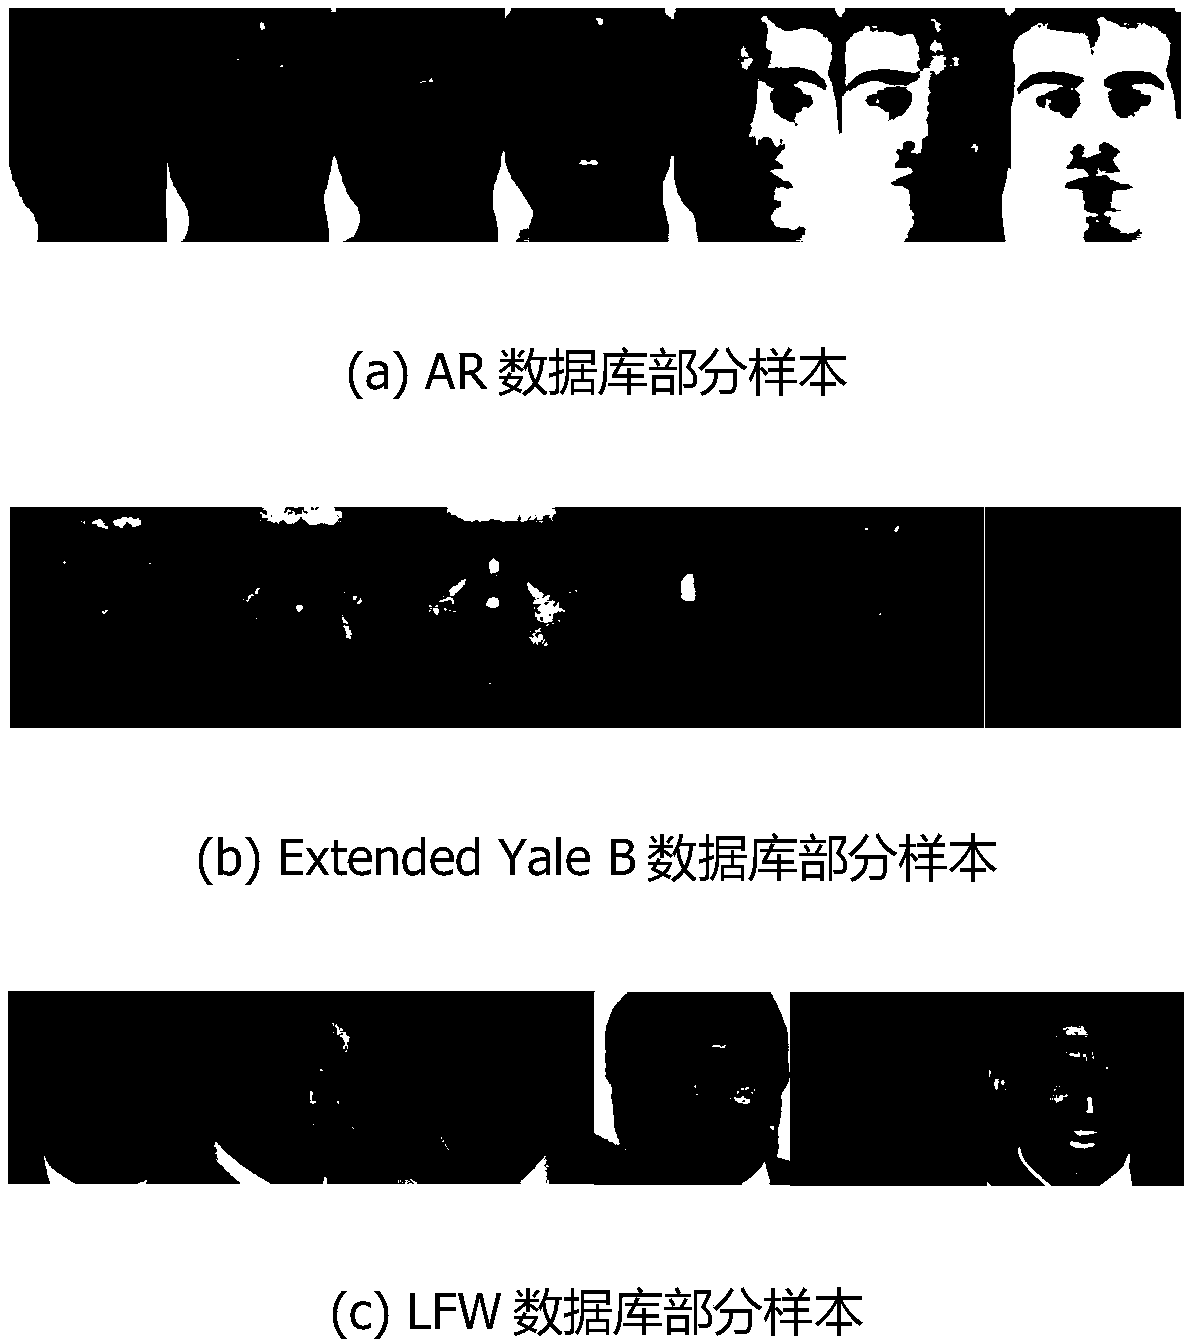 DSPP (Discriminant Sparsity Preserving Projections) method for unconstrained face recognition